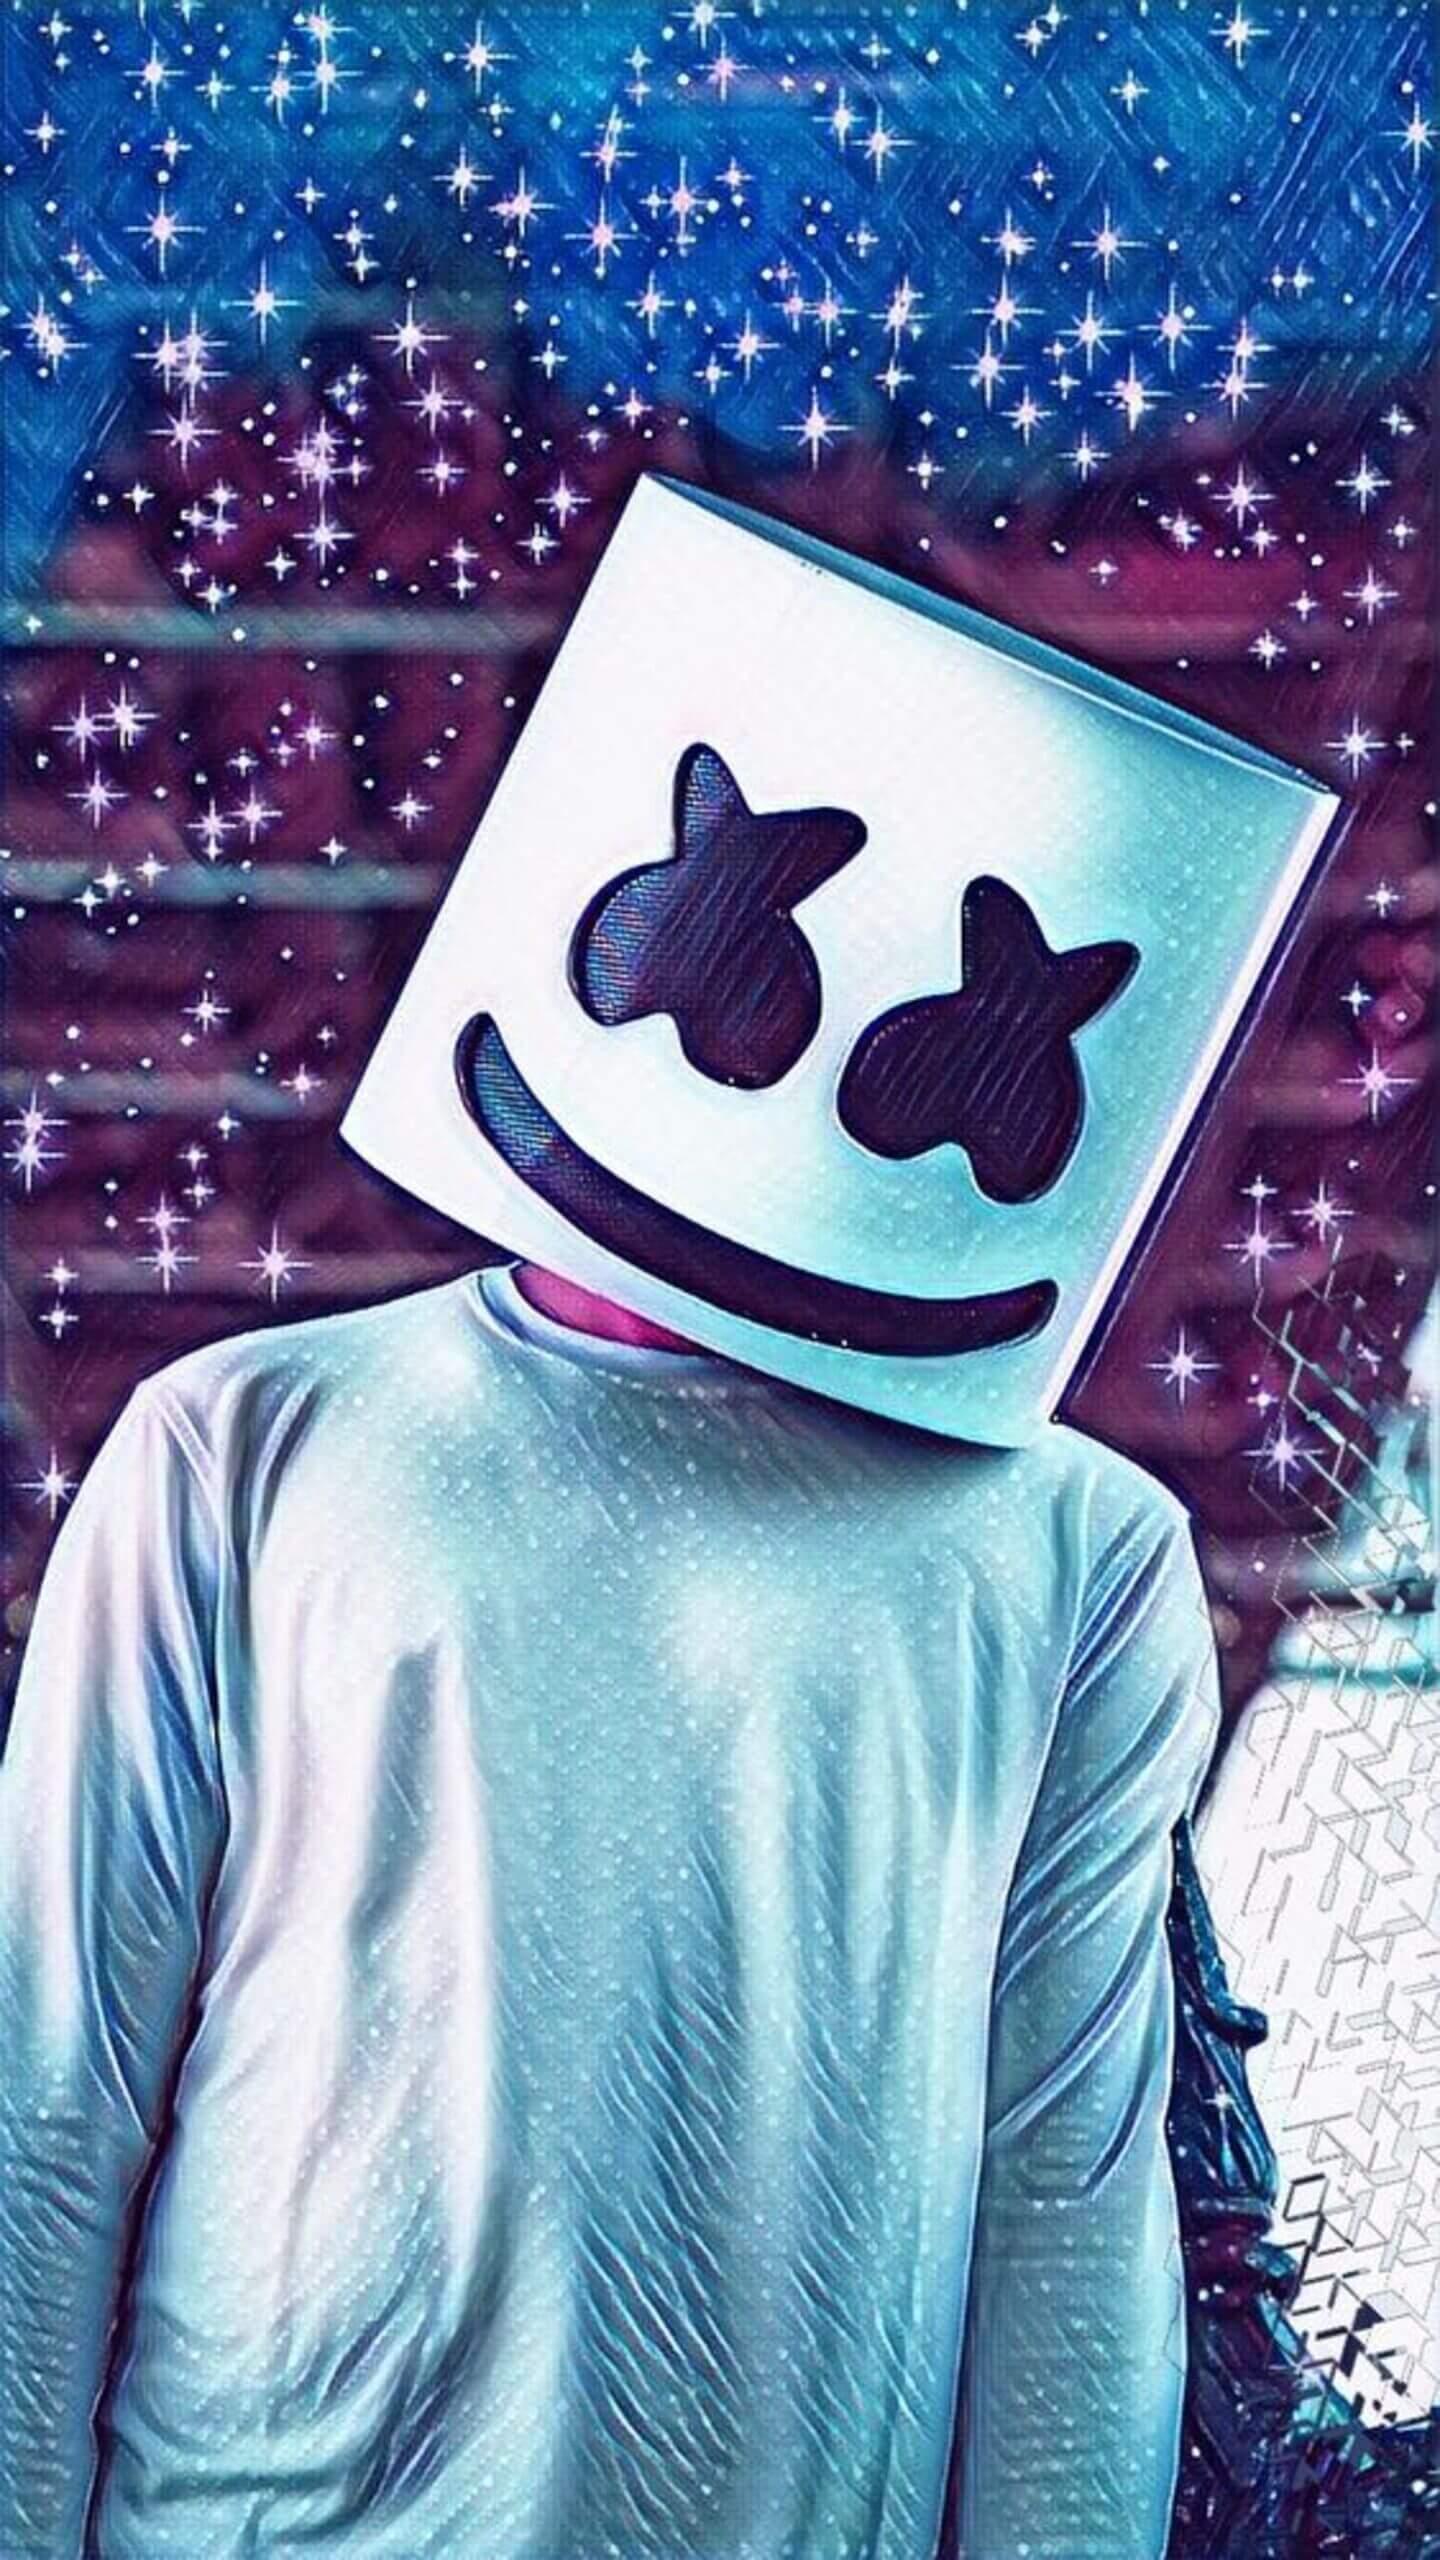 Marshmello Wallpapers - Top 80 Best Marshmello Wallpapers [ HQ ]